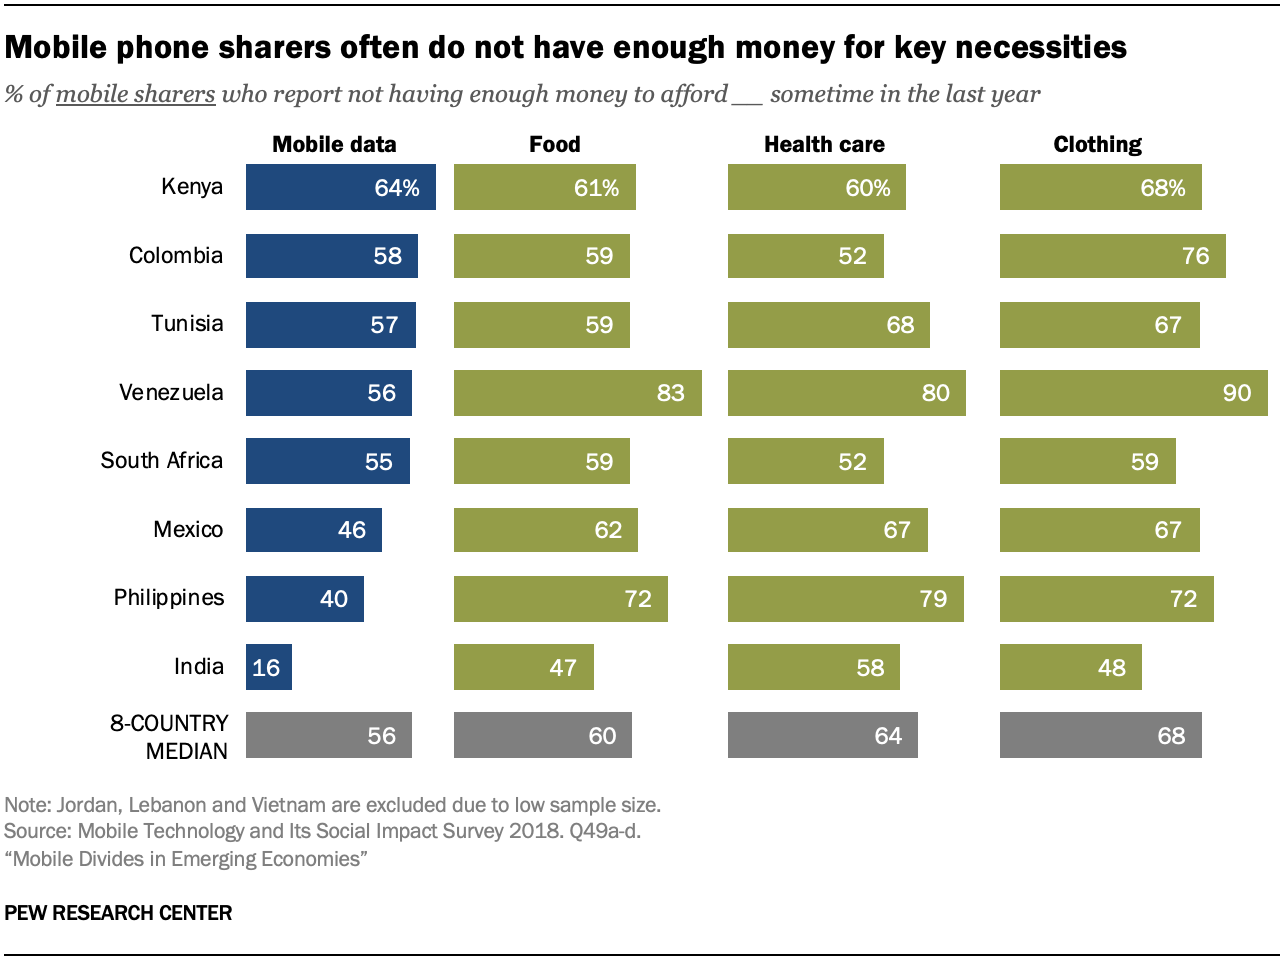 Mobile phone sharers often do not have enough money for key necessities